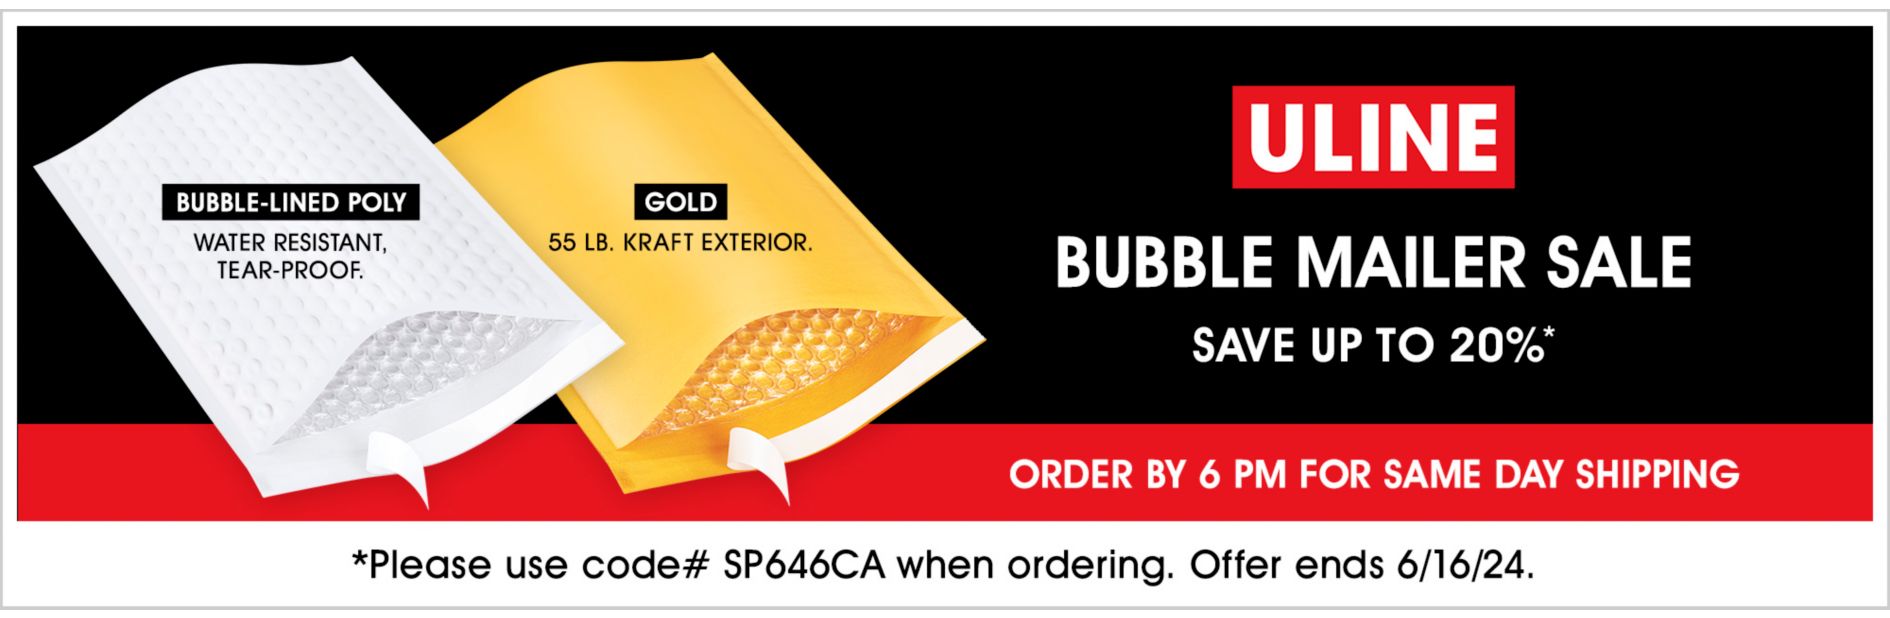 SP646CA Bubble Mailers Sale, Save up to 20%, Use code SP646CA, Offer ends 6/16/24